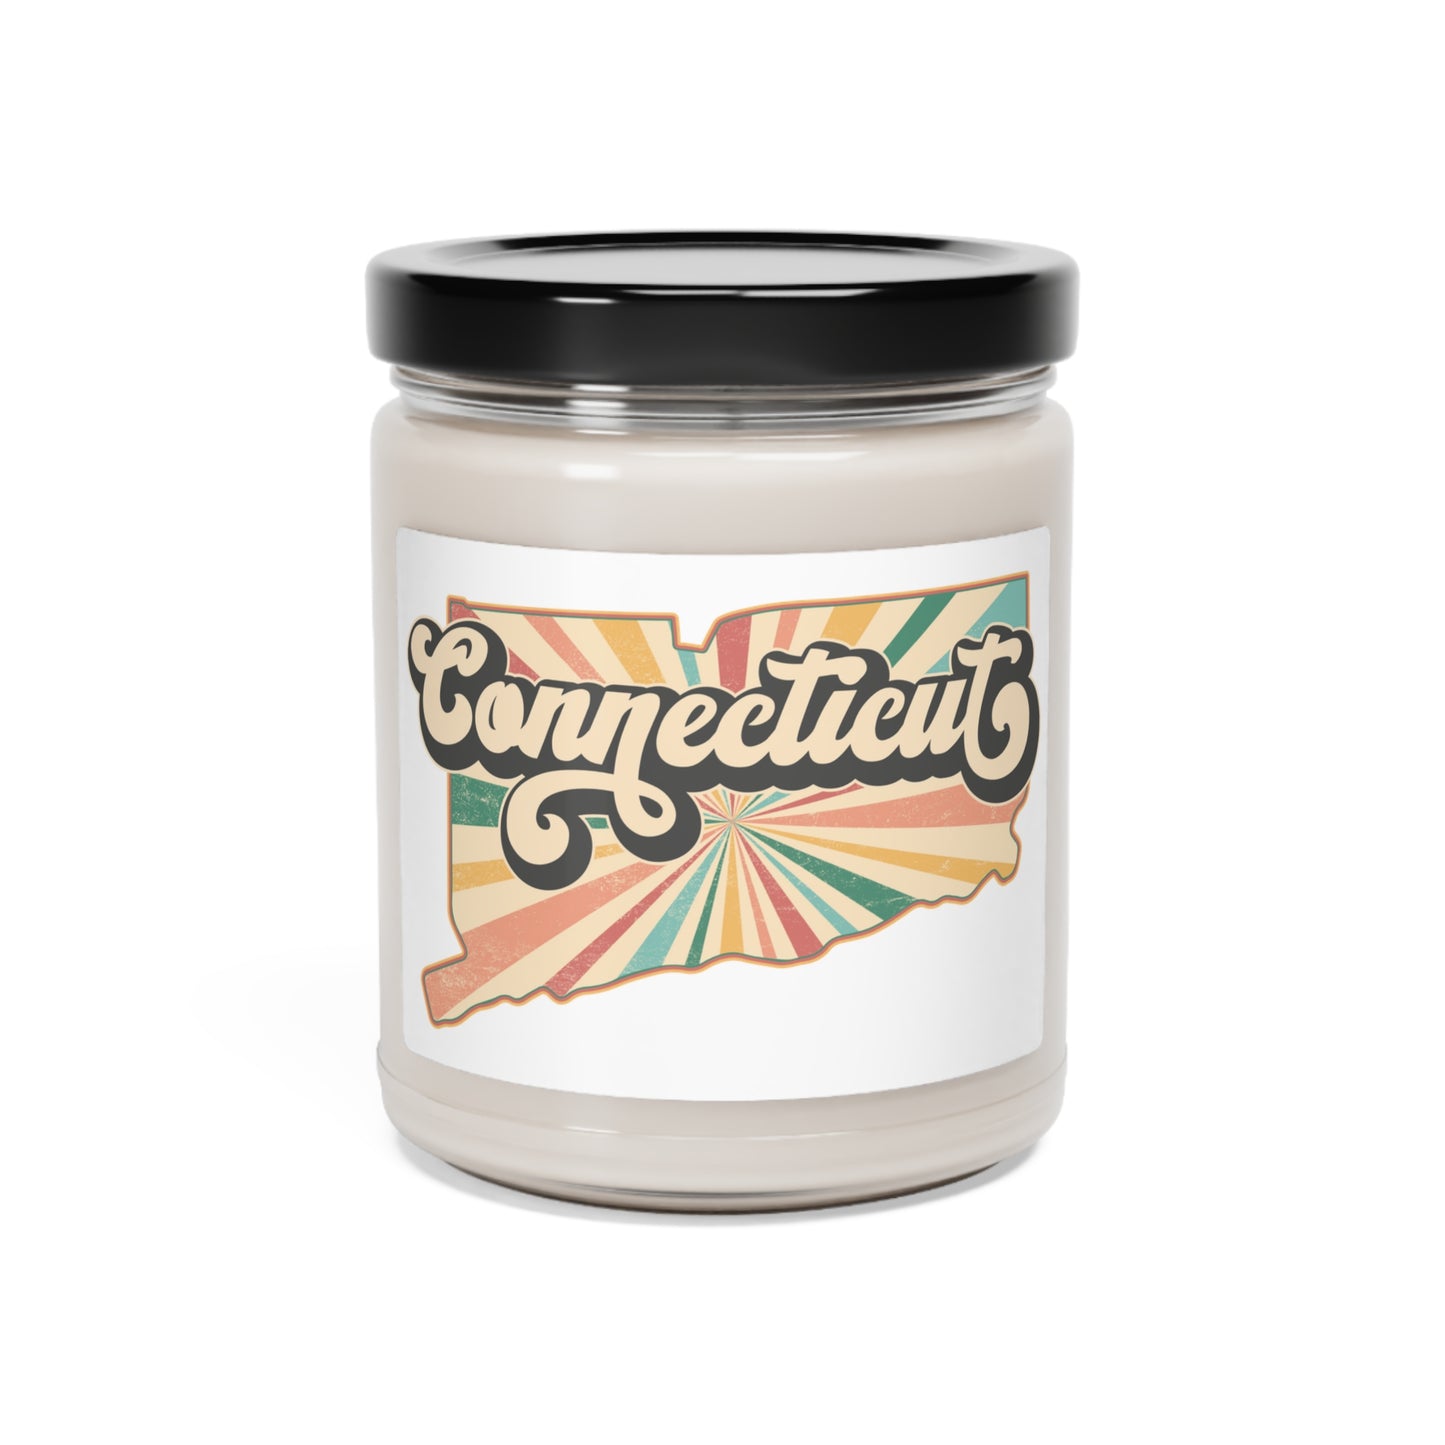 Connecticut Groovy Scented Soy Candle, 9oz